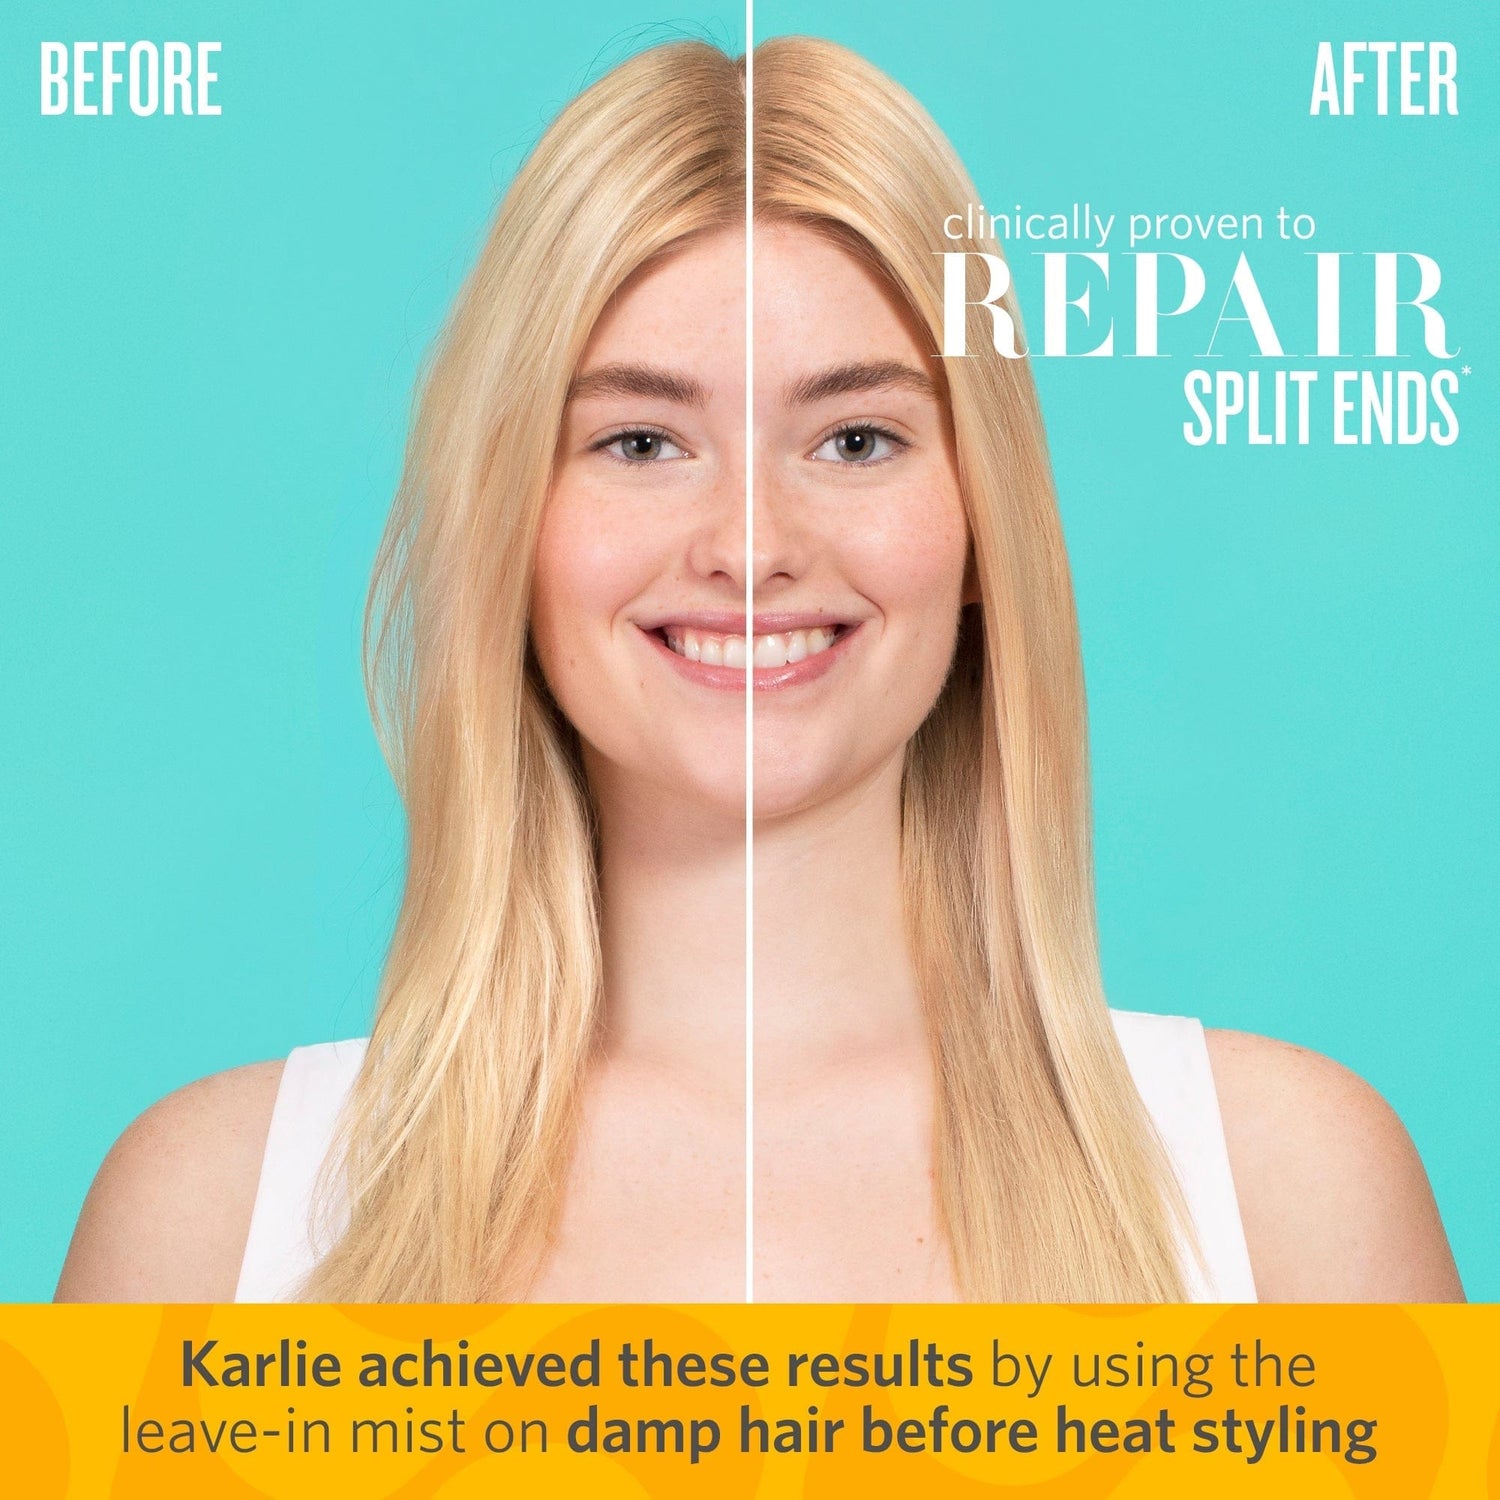 Before // After - Clinically proven to repair split ends*. Karlie achieved these results by using the leave-in mist on damp hair before heat styling 